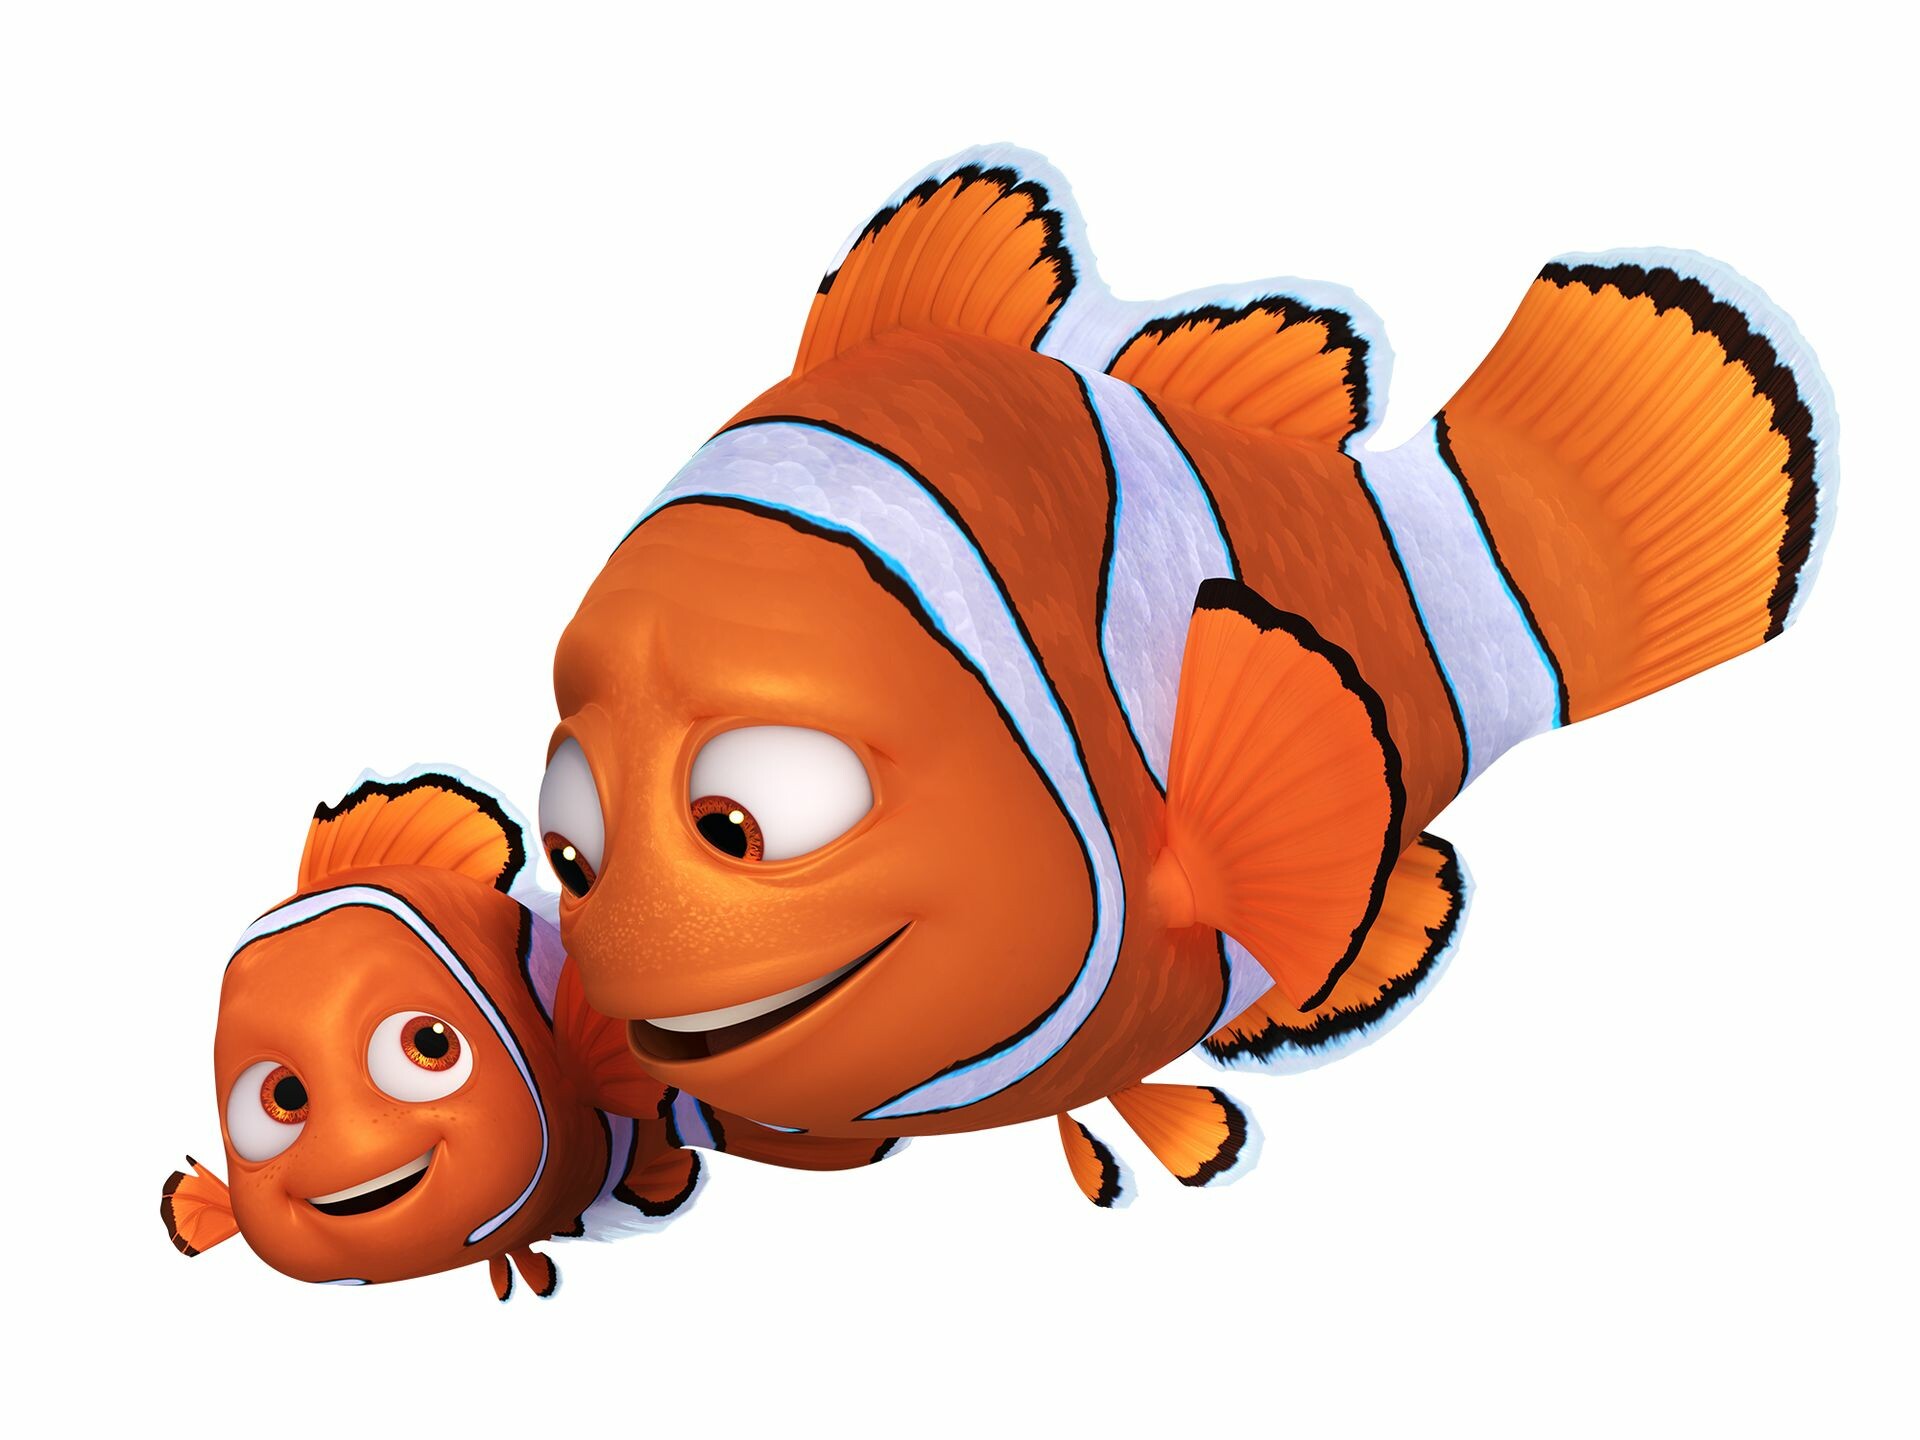 Finding Nemo: A story of a father who loses his son, Marlin, Clownfish. 1920x1440 HD Background.